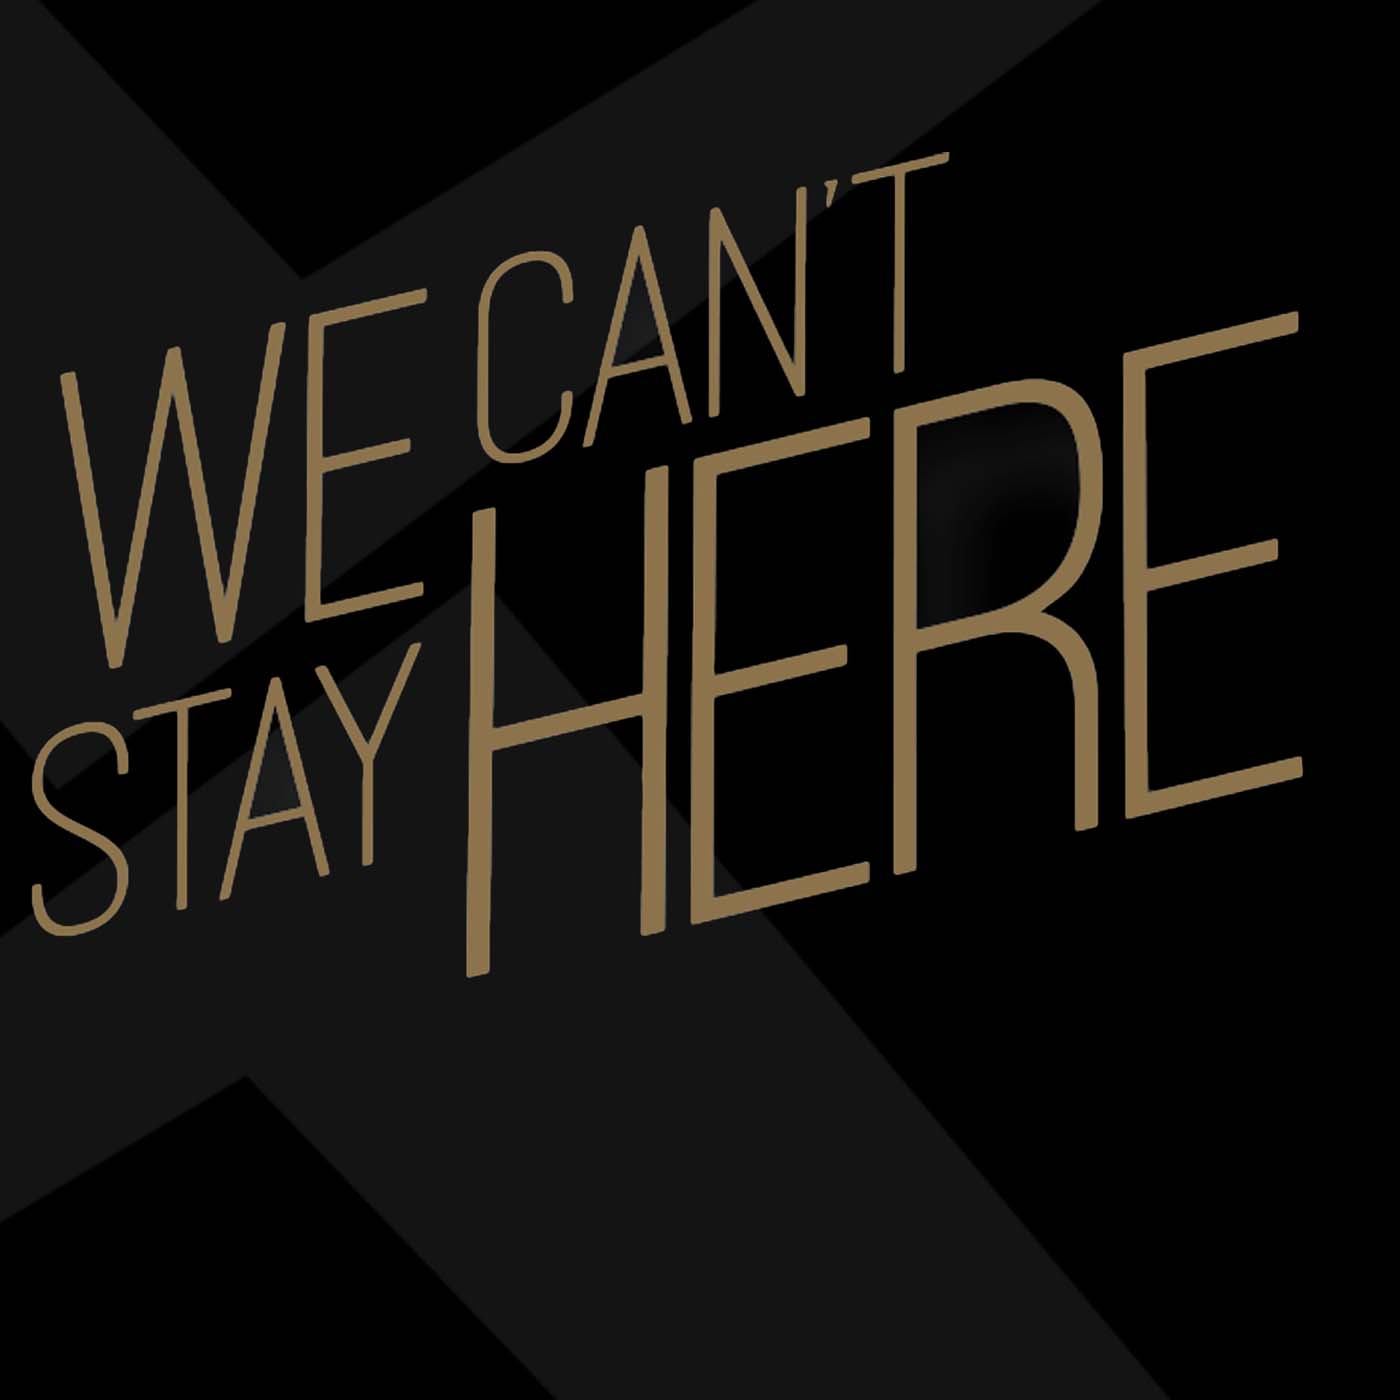 We Can't Stay Here - Kyle Brownlee